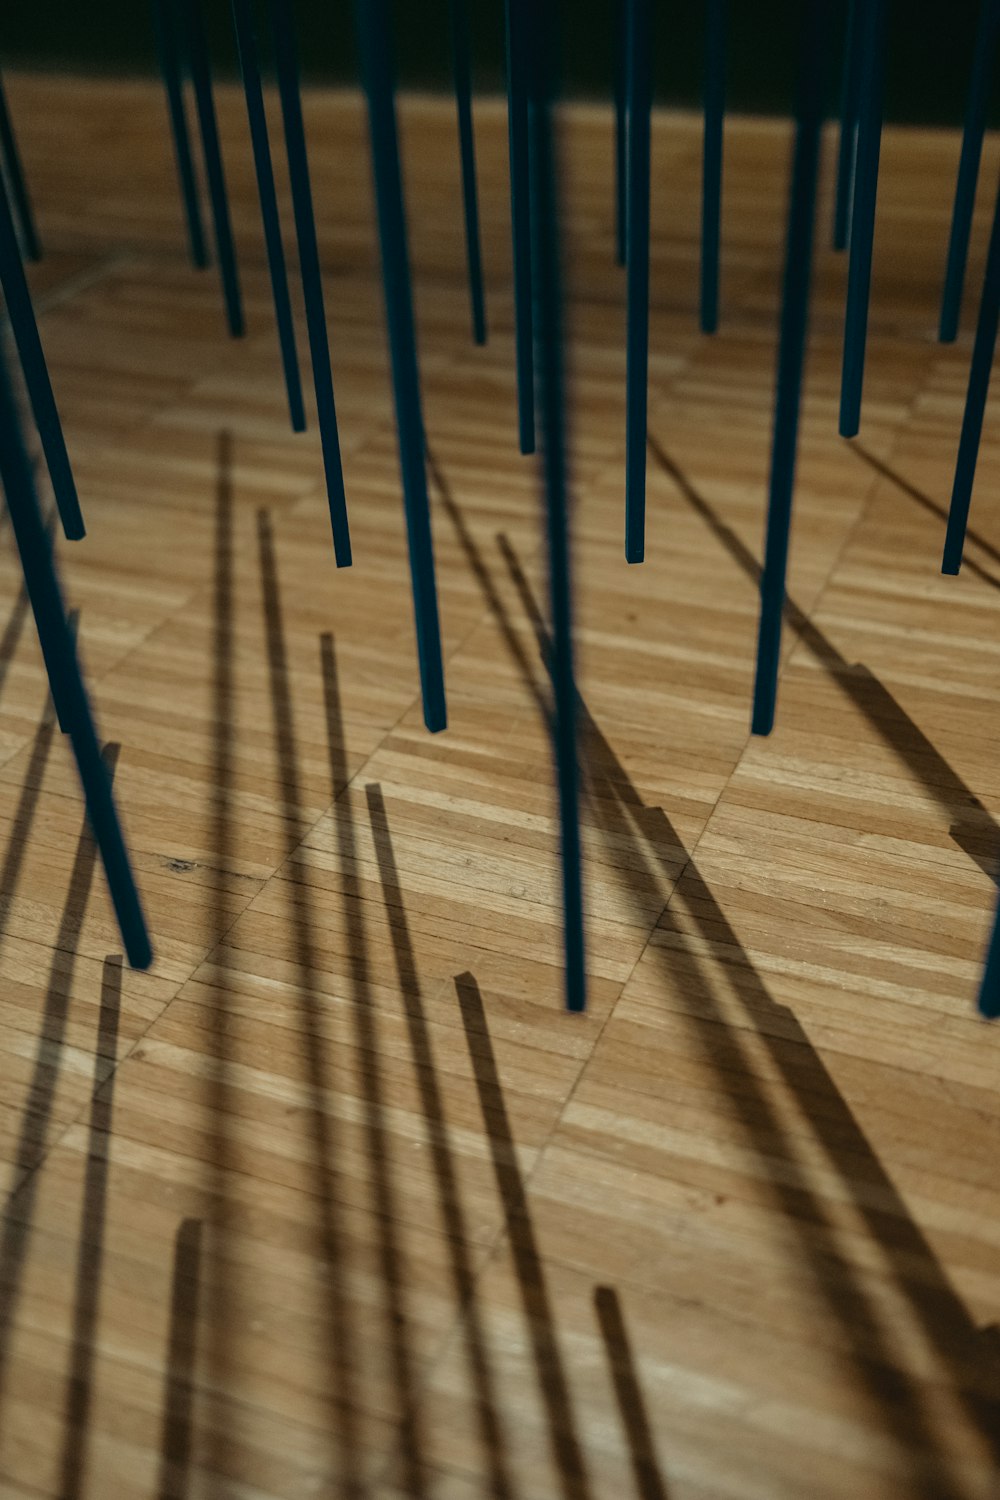 a wooden floor with many sticks sticking out of it